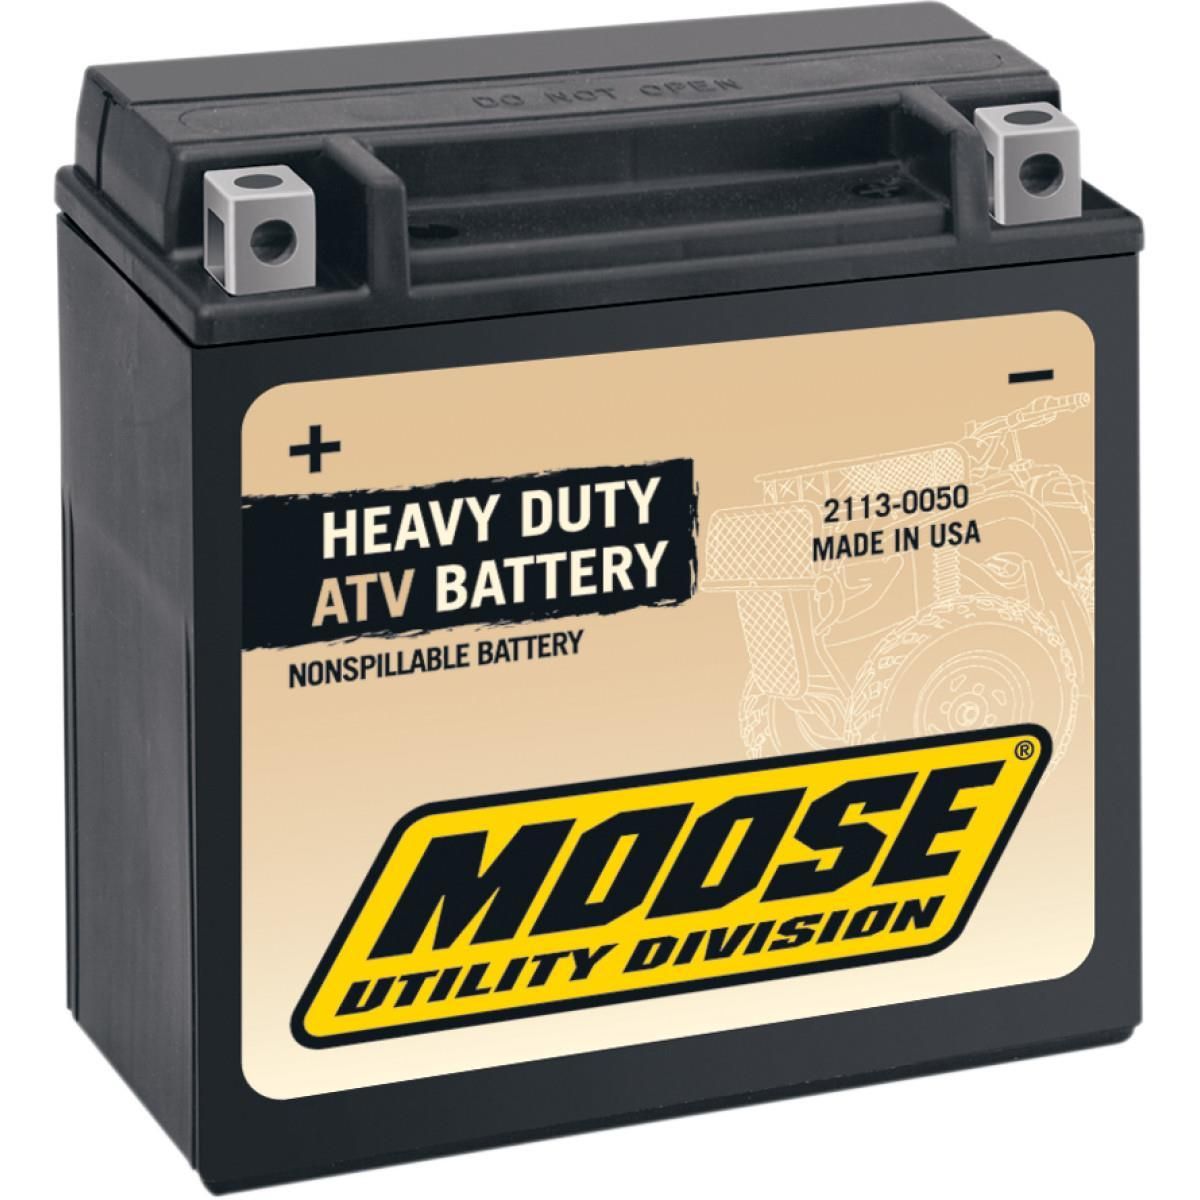 2956-MOOSE-UTILI-21130052 Factory-Activated AGM Maintenance-Free Battery